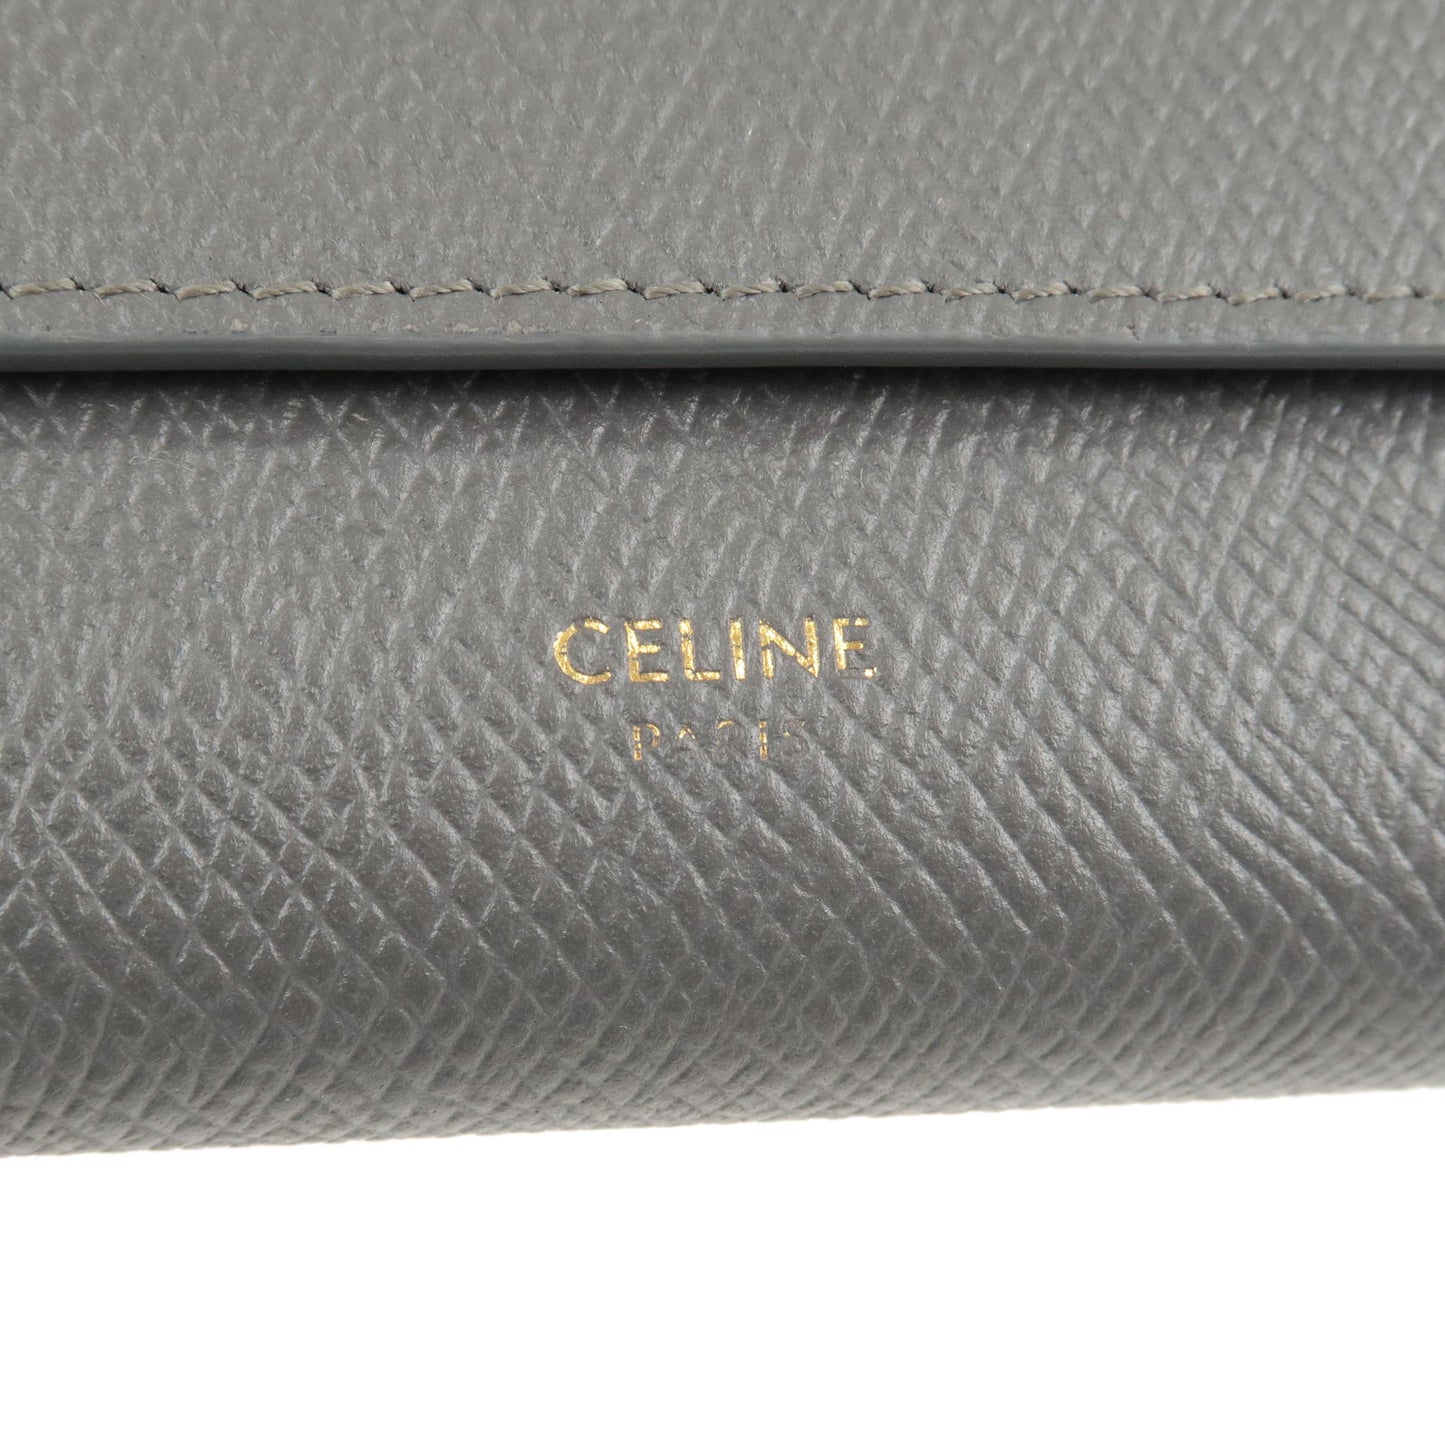 CELINE Leather Tri-fold Compact Small Wallet Gray 10B573